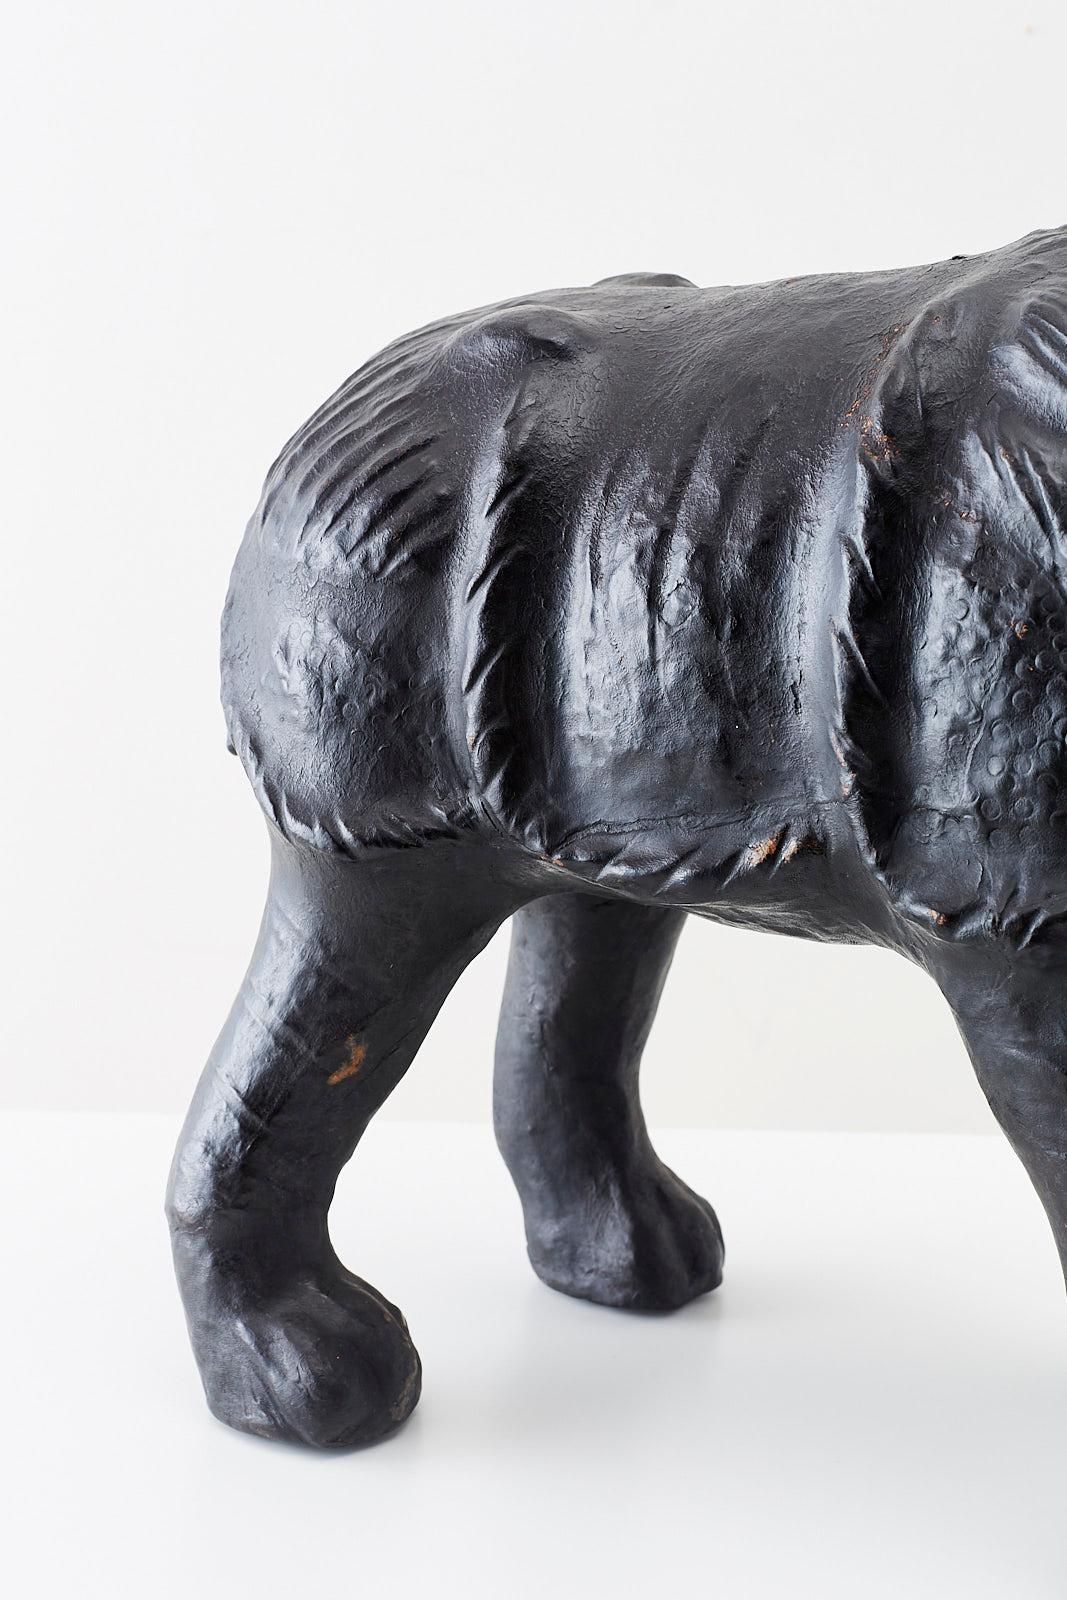 Glass Large Leather Clad Rhino Sculpture or Footstool For Sale